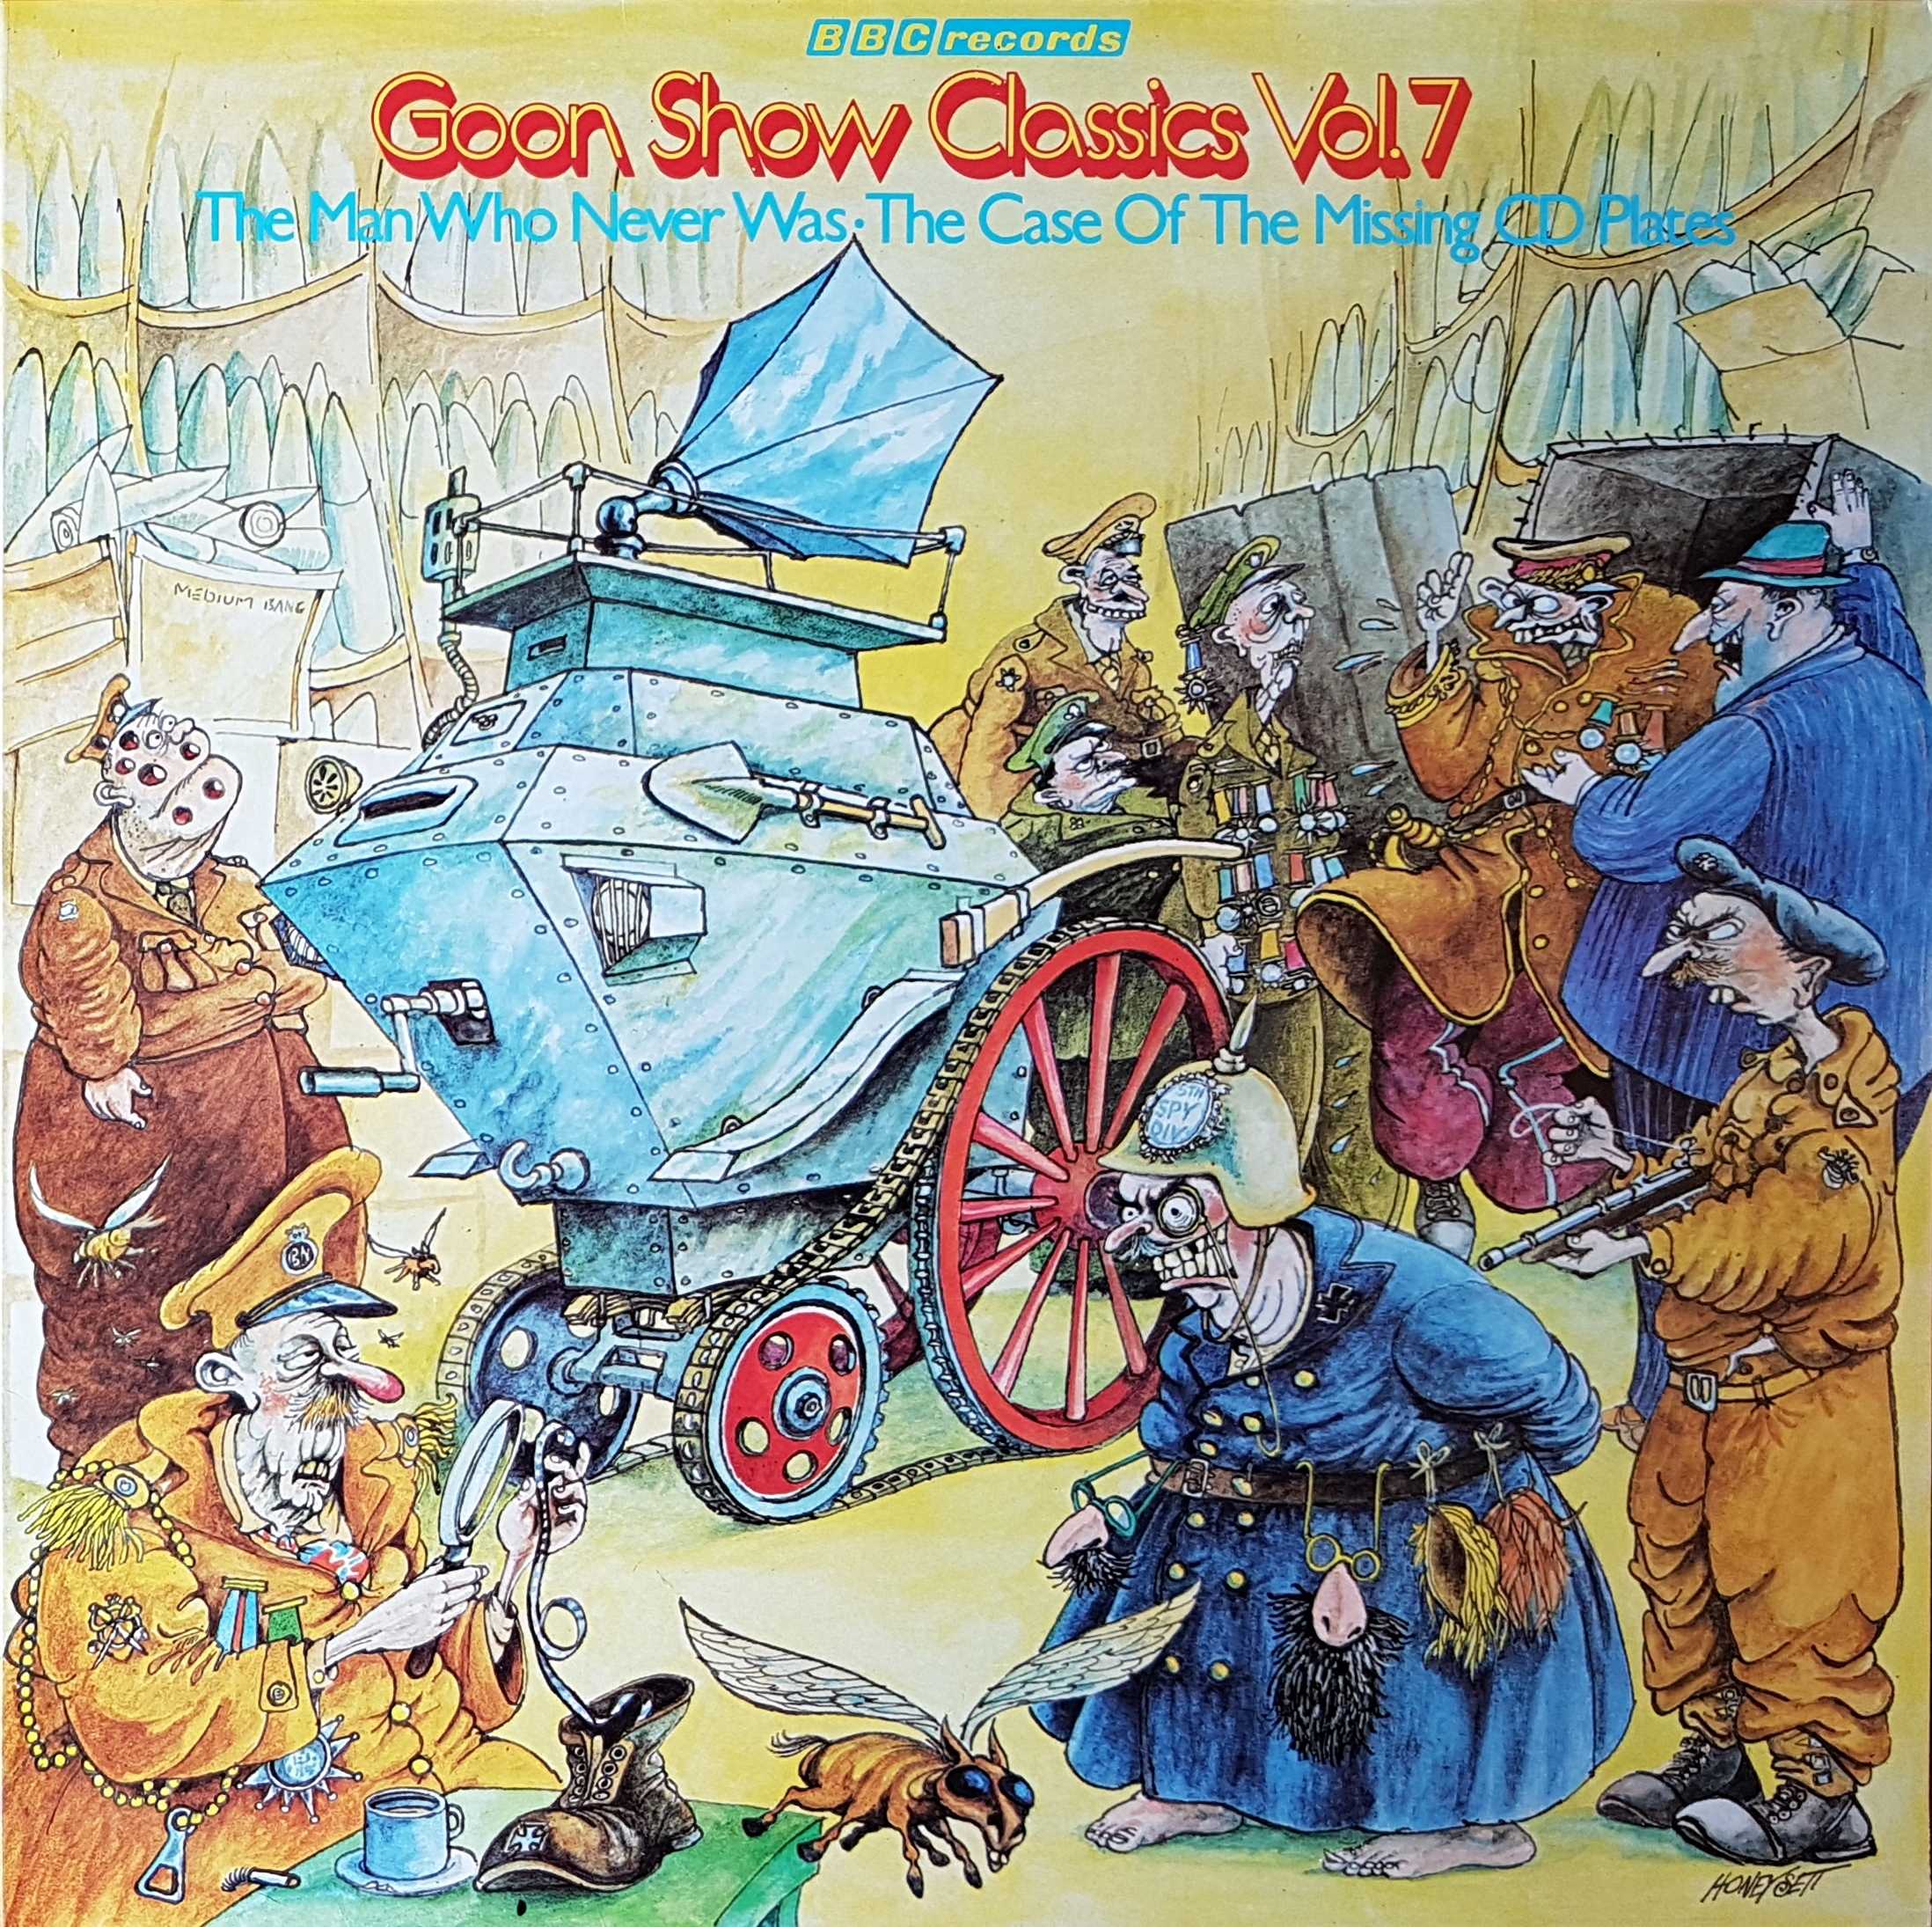 Picture of REB 392 Goon show classics - Volume 7 by artist Spike Milligan